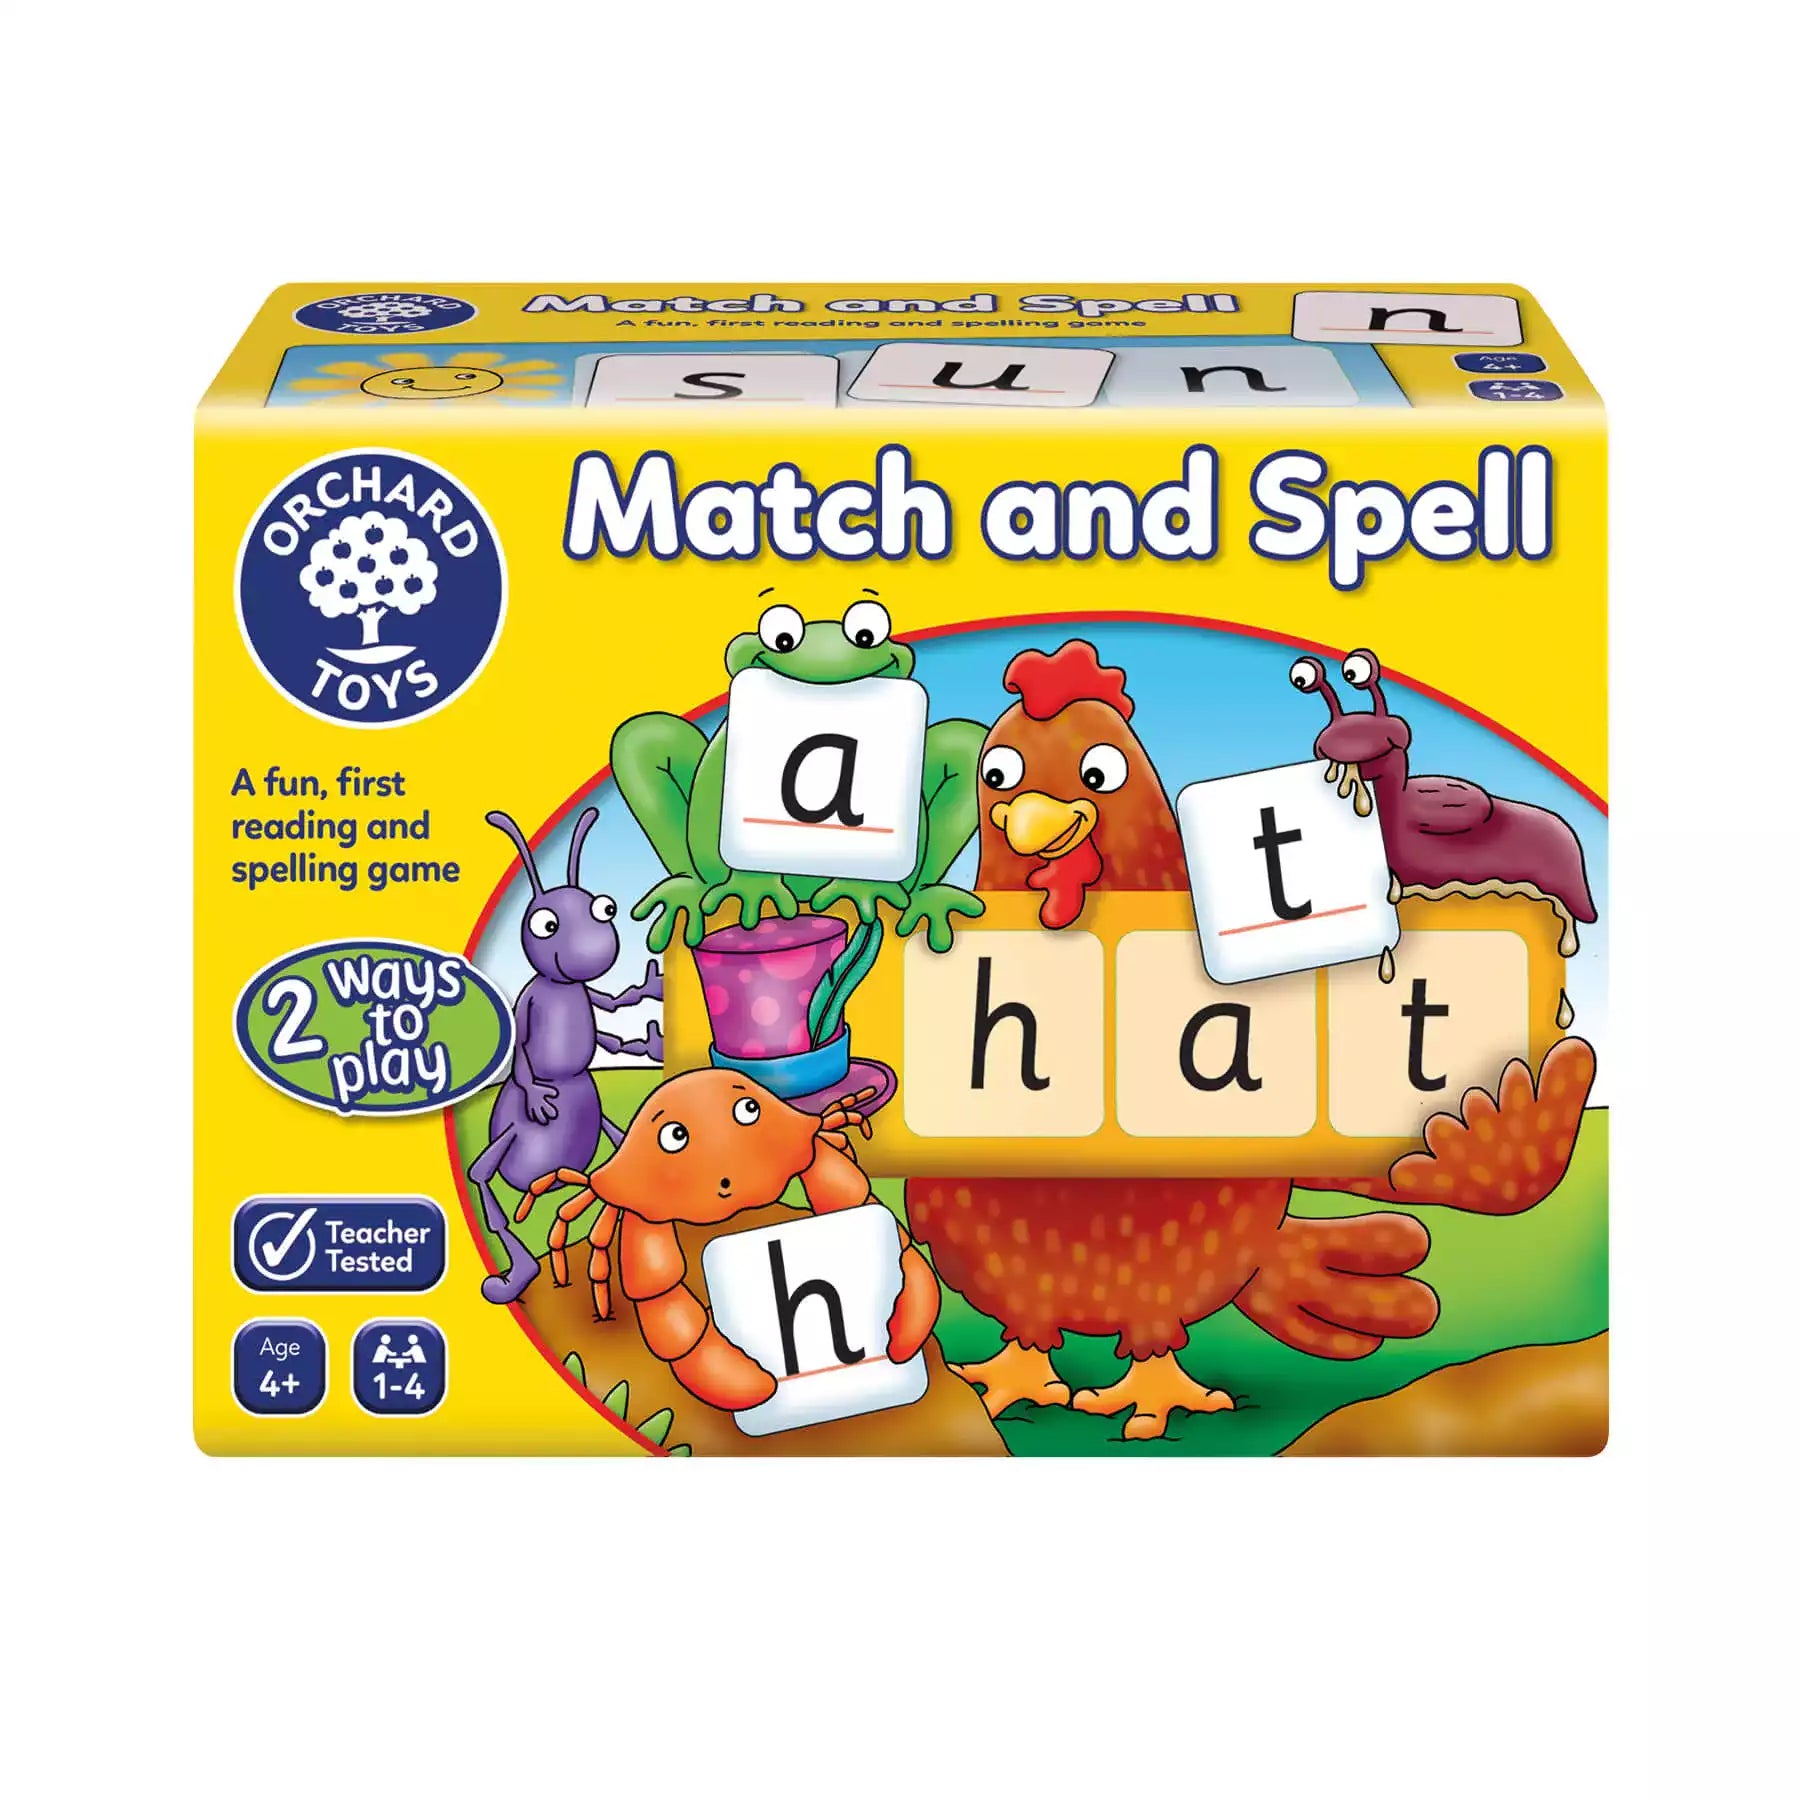 Match and Spell Linguistics Game for Children